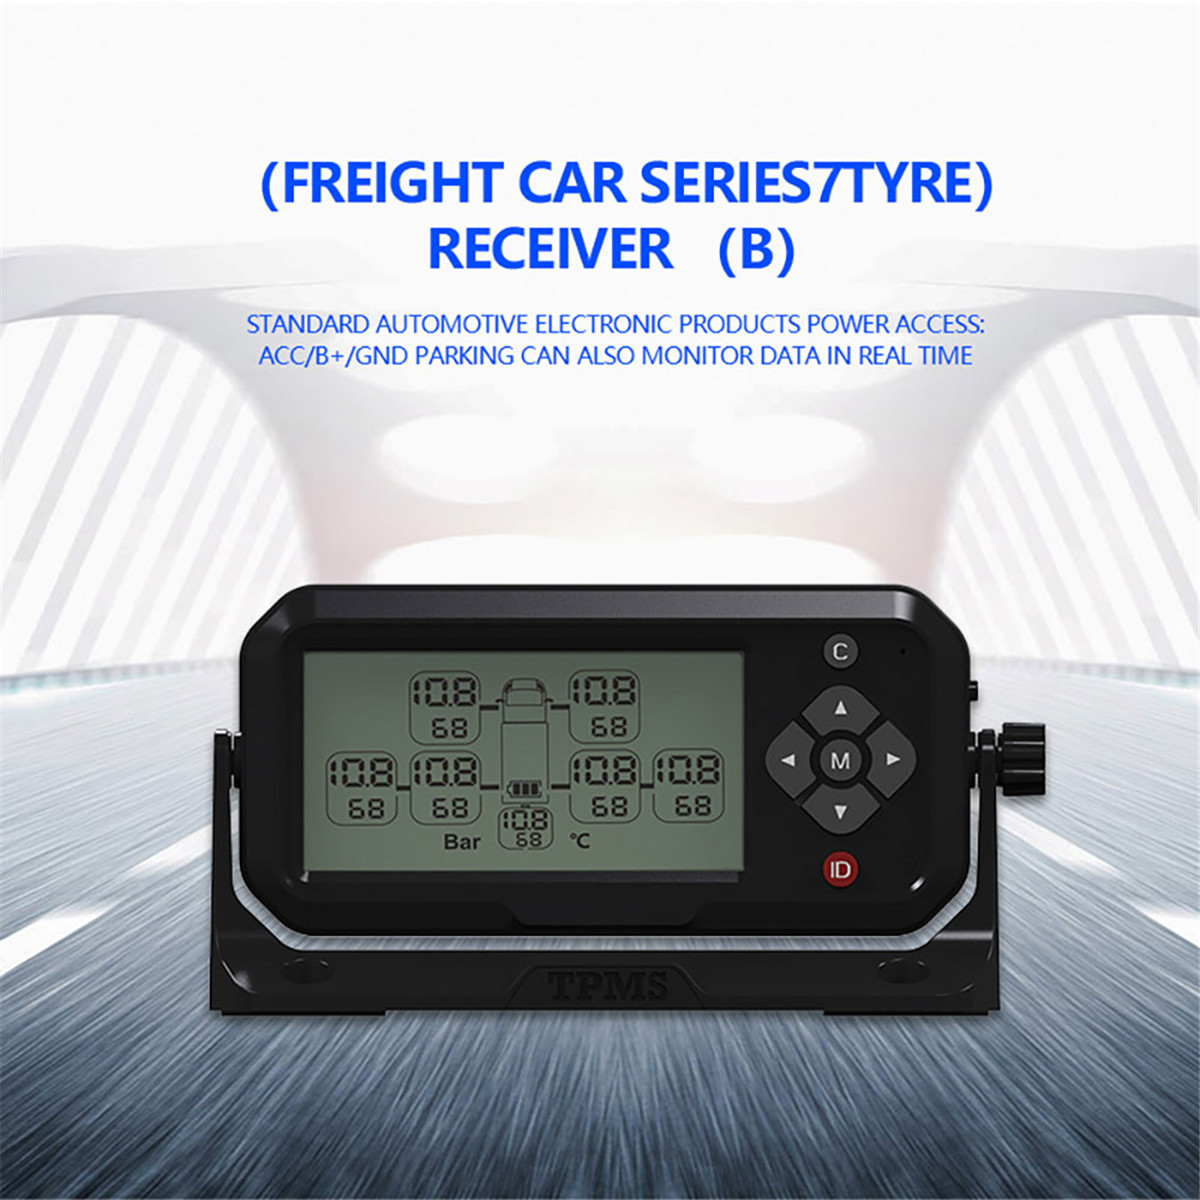 (Freight car series7tyre) Receiver (10)